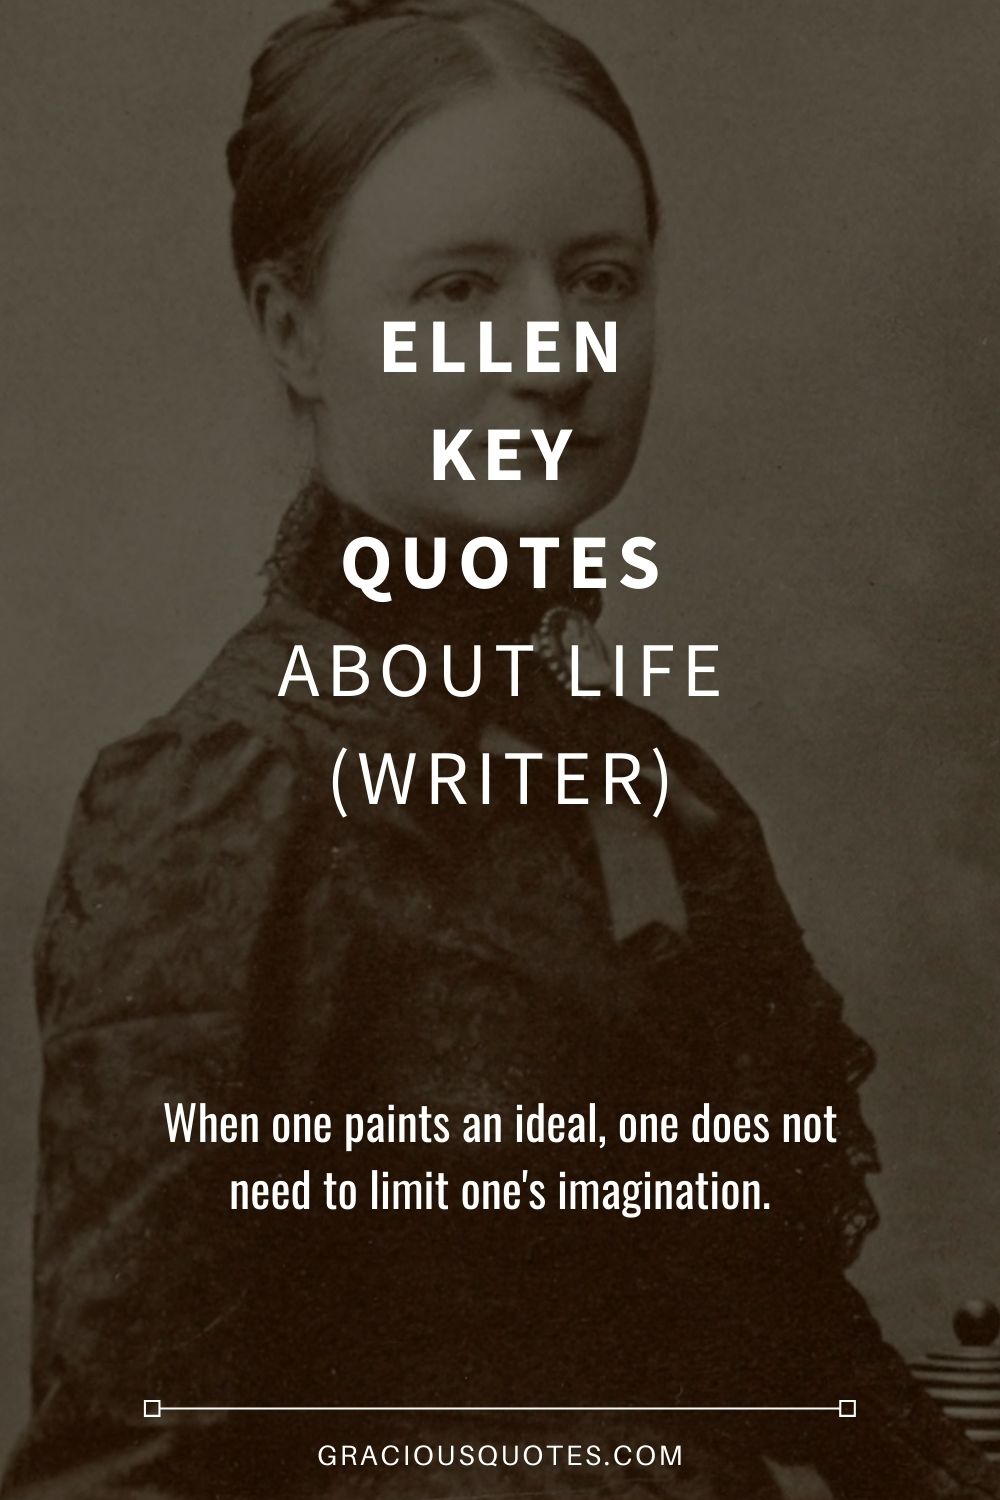 Ellen Key Quotes About Life (WRITER) - Gracious Quotes